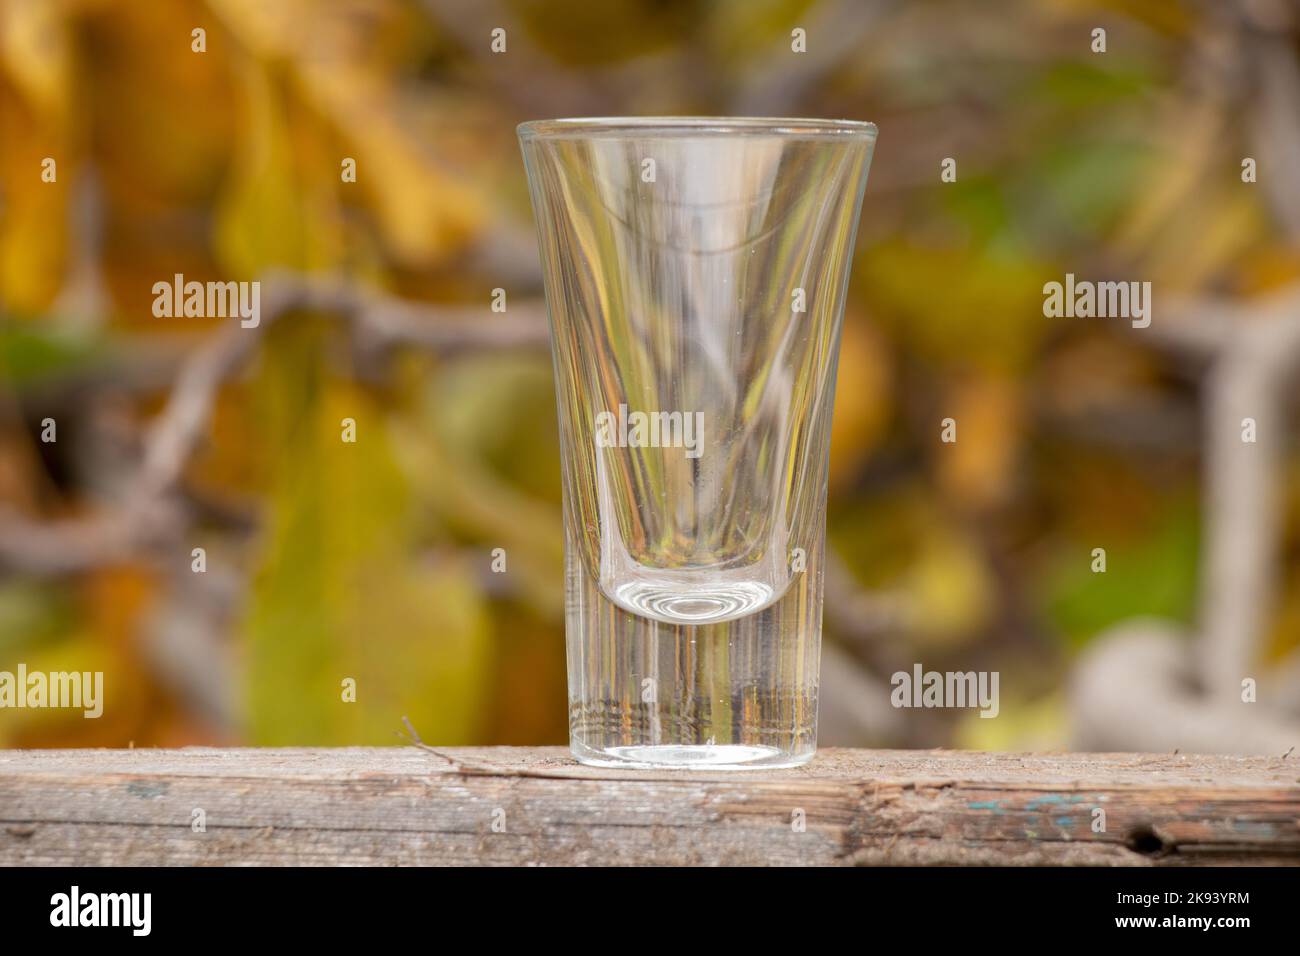 empty glass goblet for alcoholic beverages stands on a wooden table in yellow leaves in the autumn on the street Stock Photo